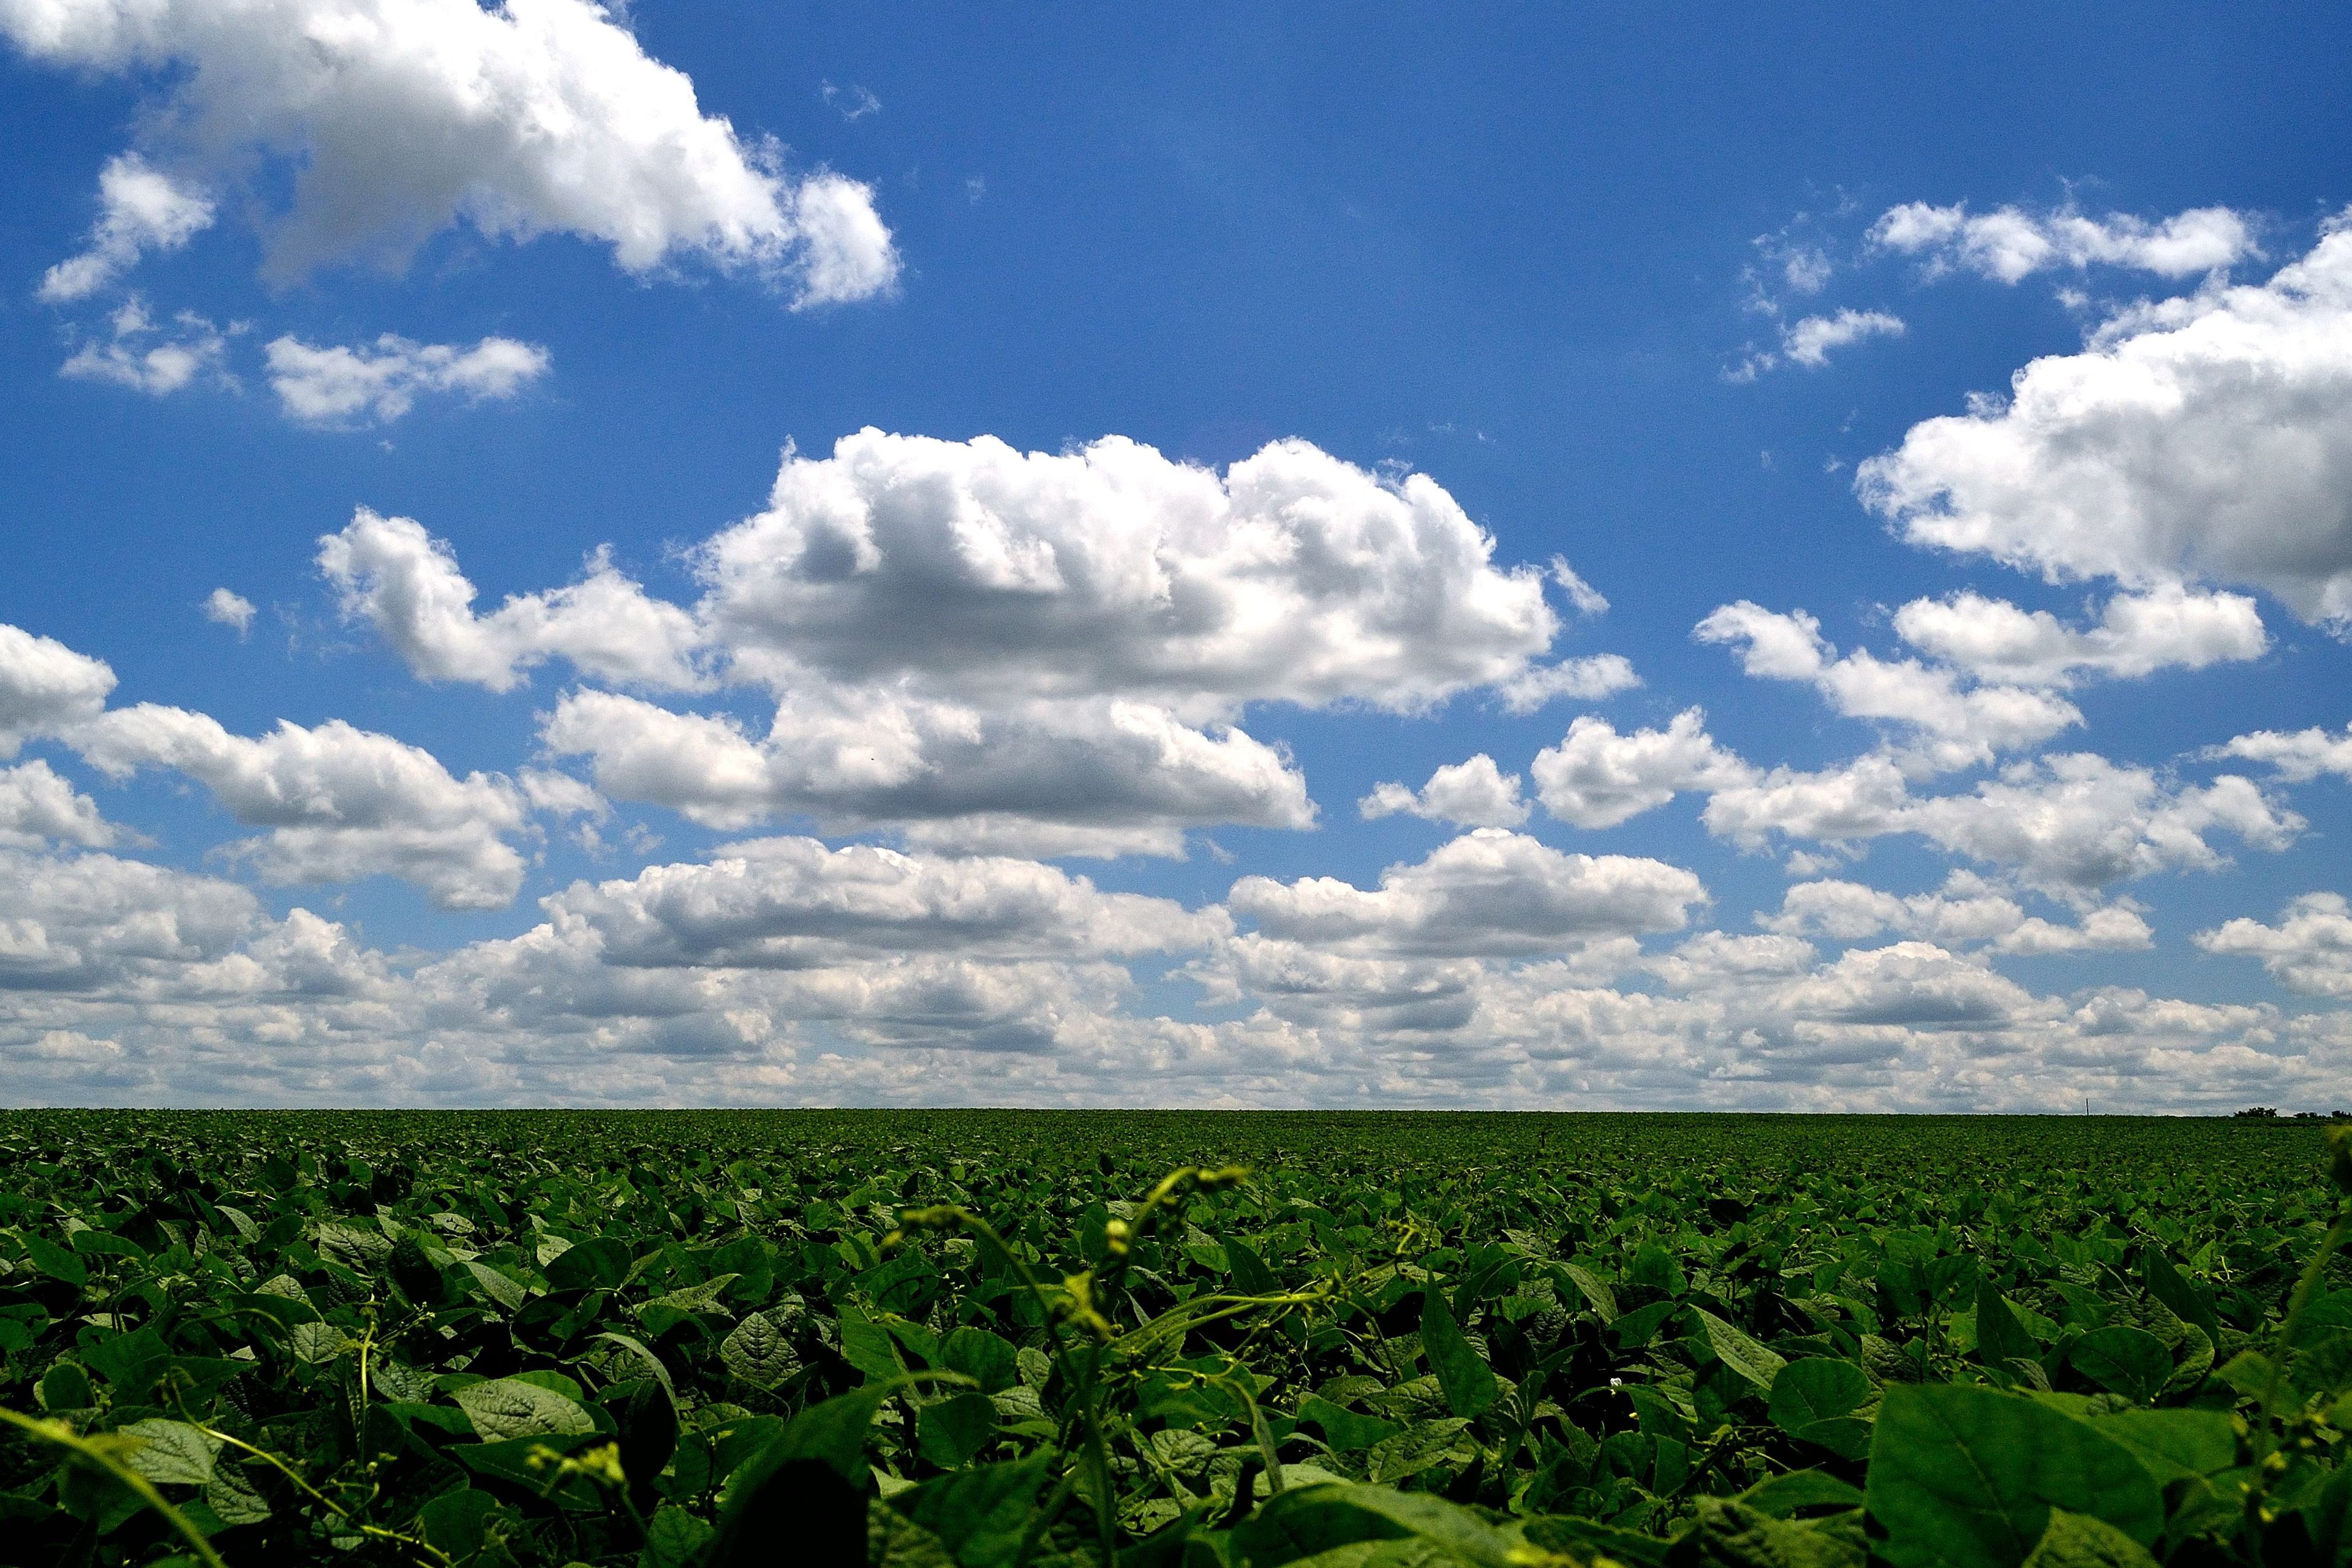 A field of crops with a blue sky overhead.